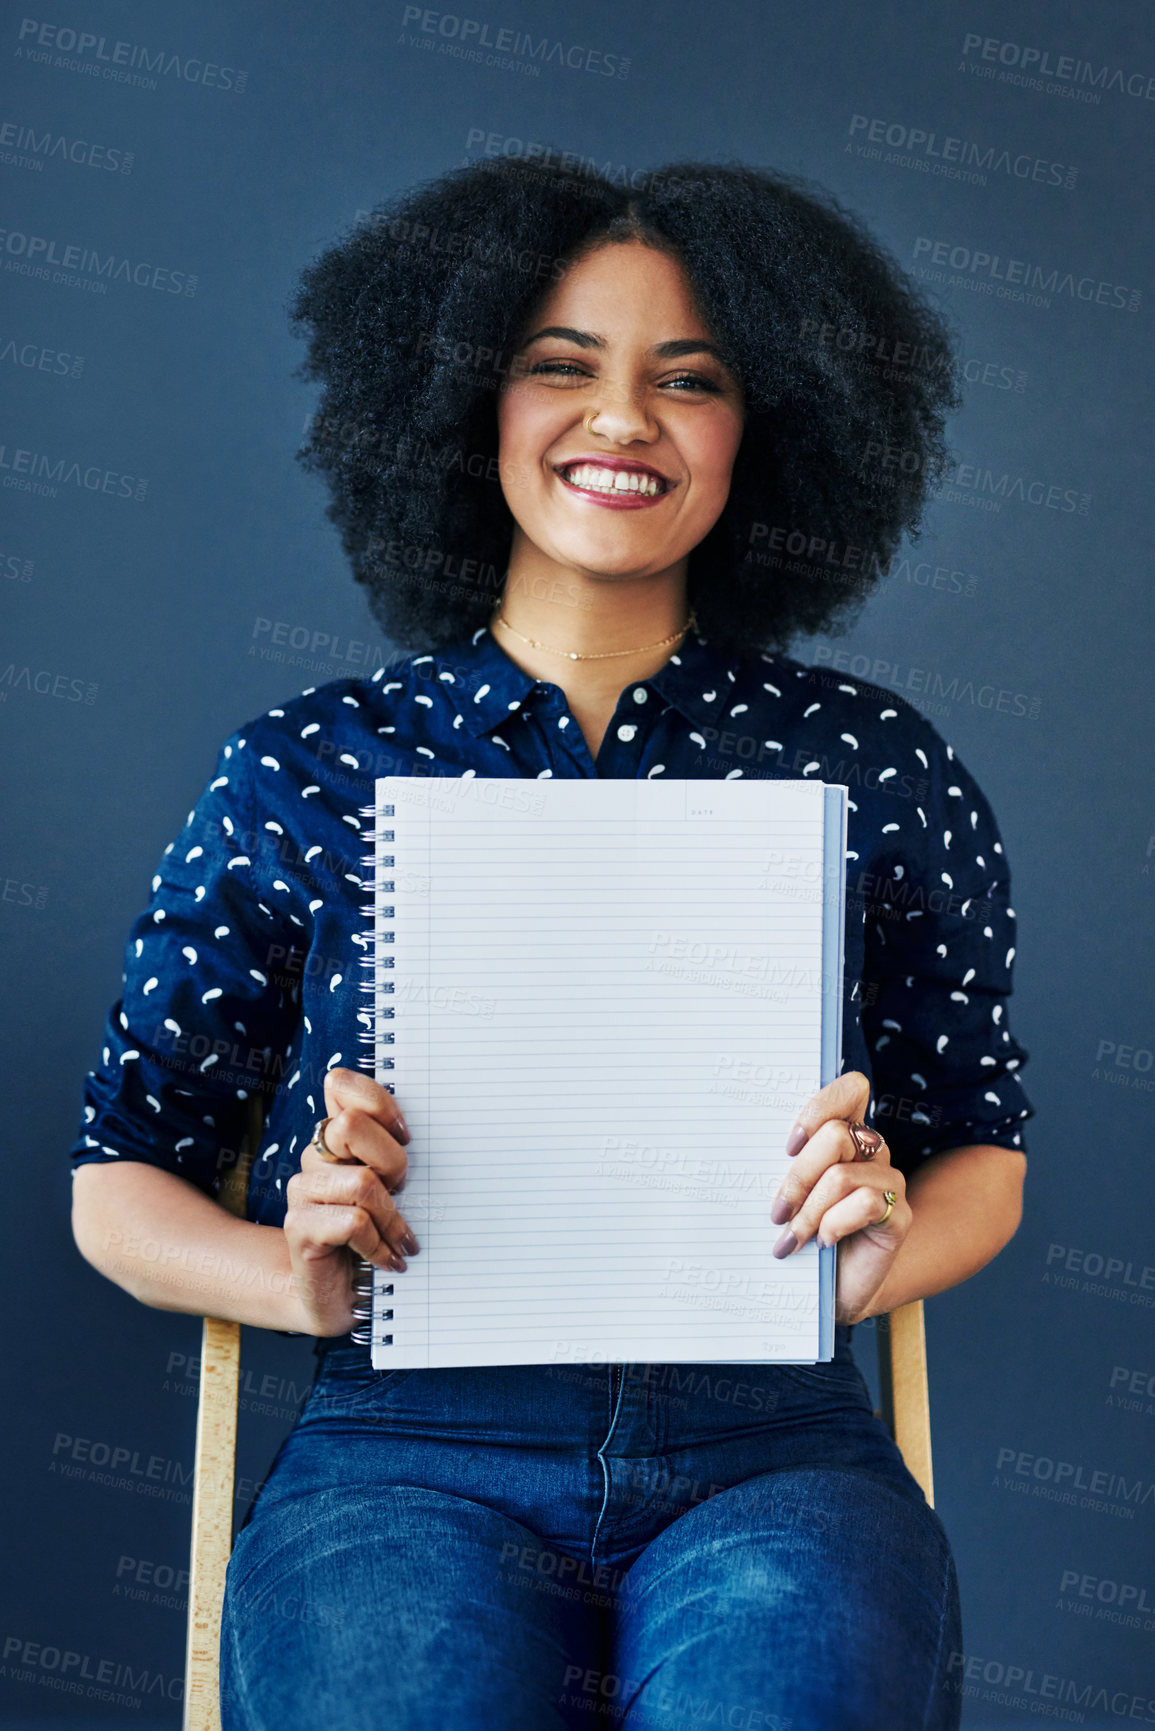 Buy stock photo Studio shot of a young woman holding up a blank notebook against a blue background